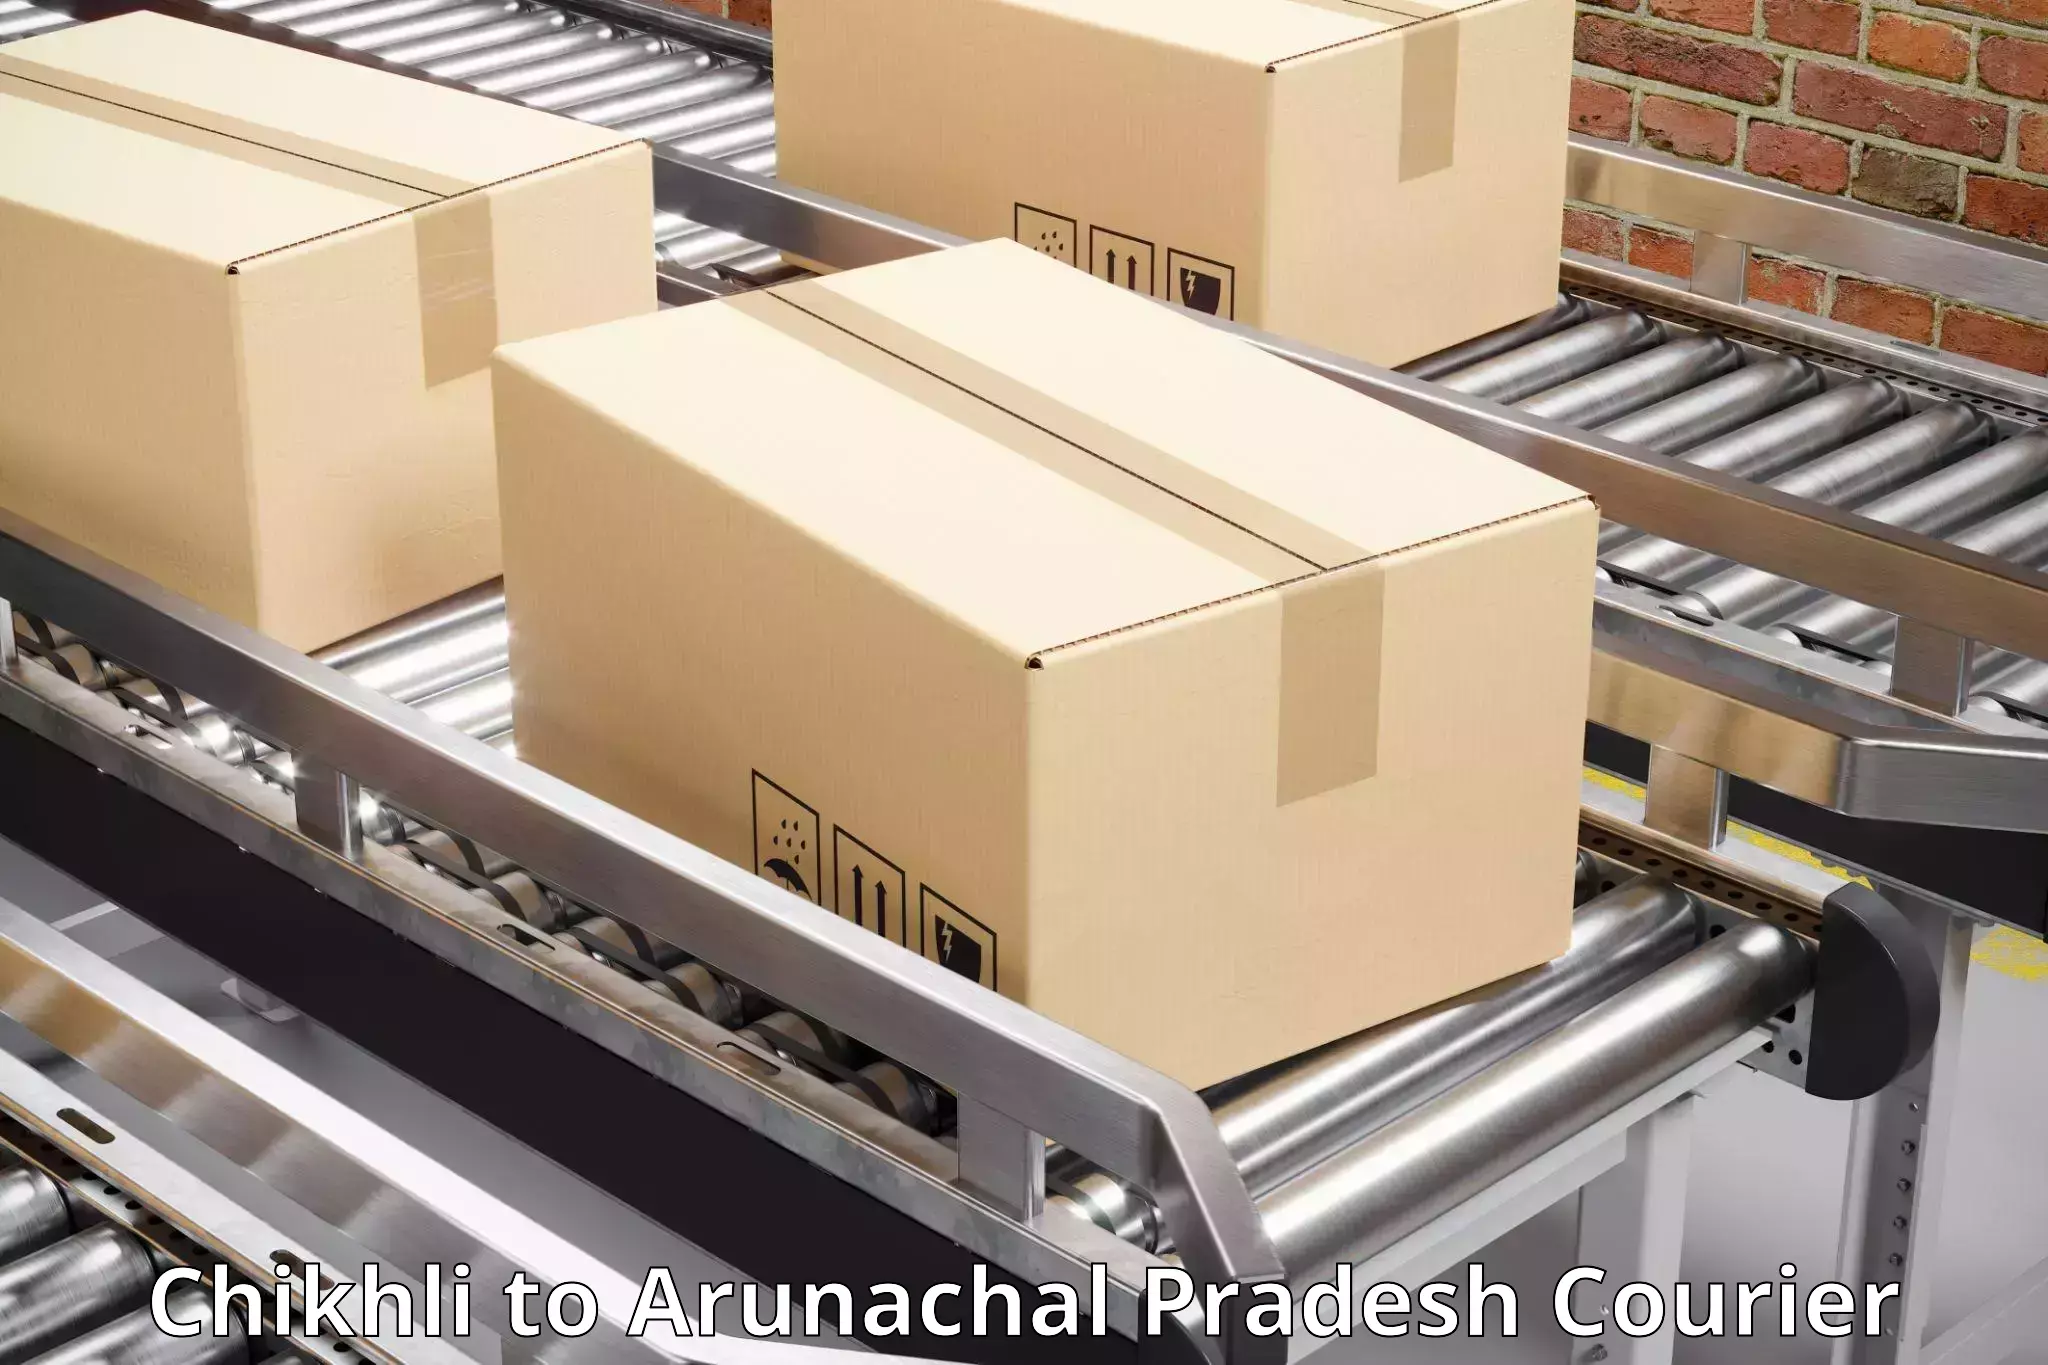 Express courier capabilities Chikhli to Dirang